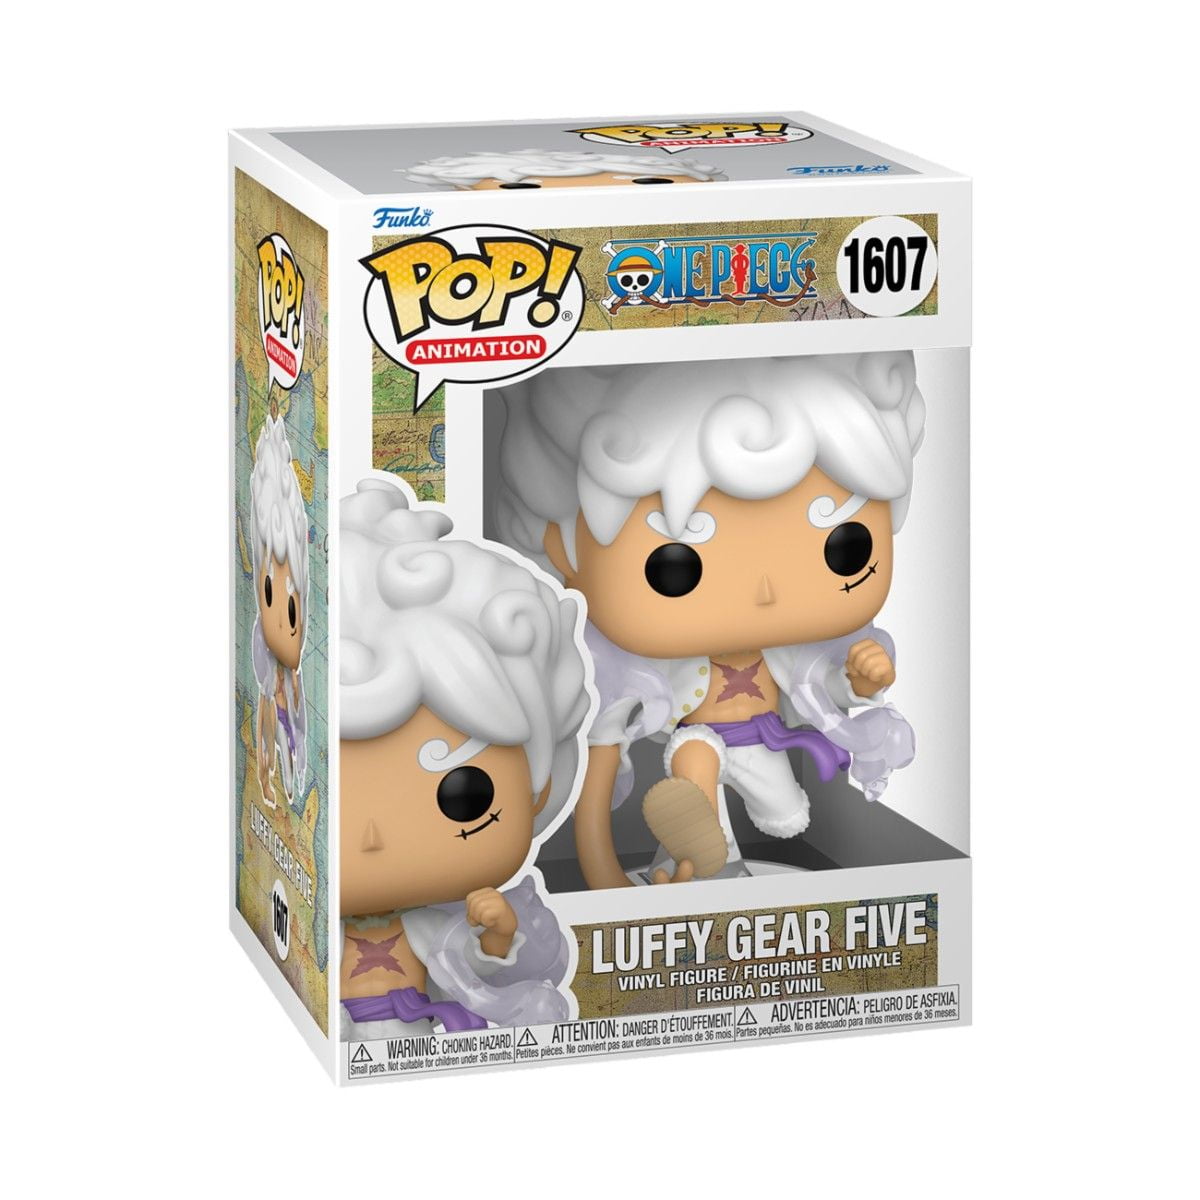 Luffy Gear Five with Glow Chase - One Piece - Funko POP! Animation (1607)